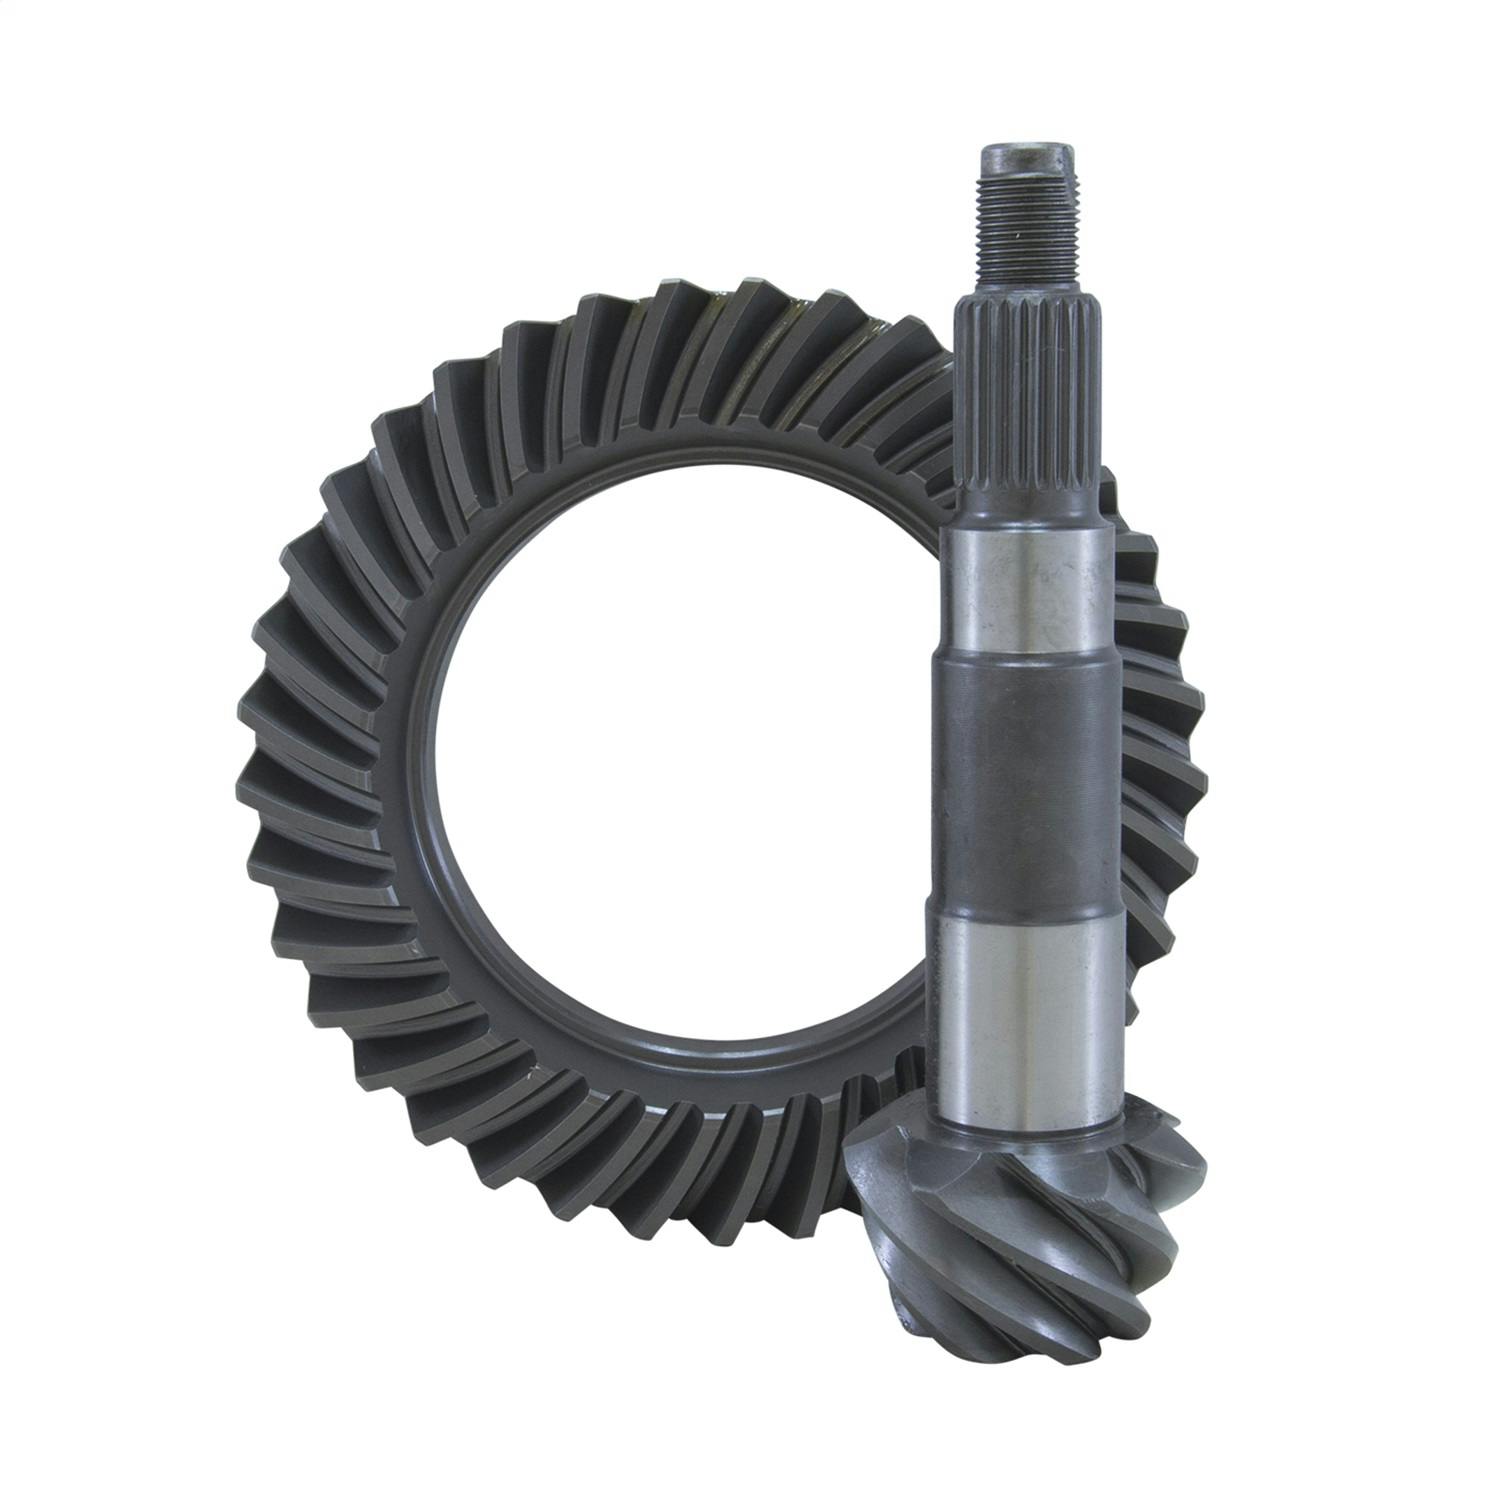 USA Standard Gear ZG T7.5-488 Ring And Pinion